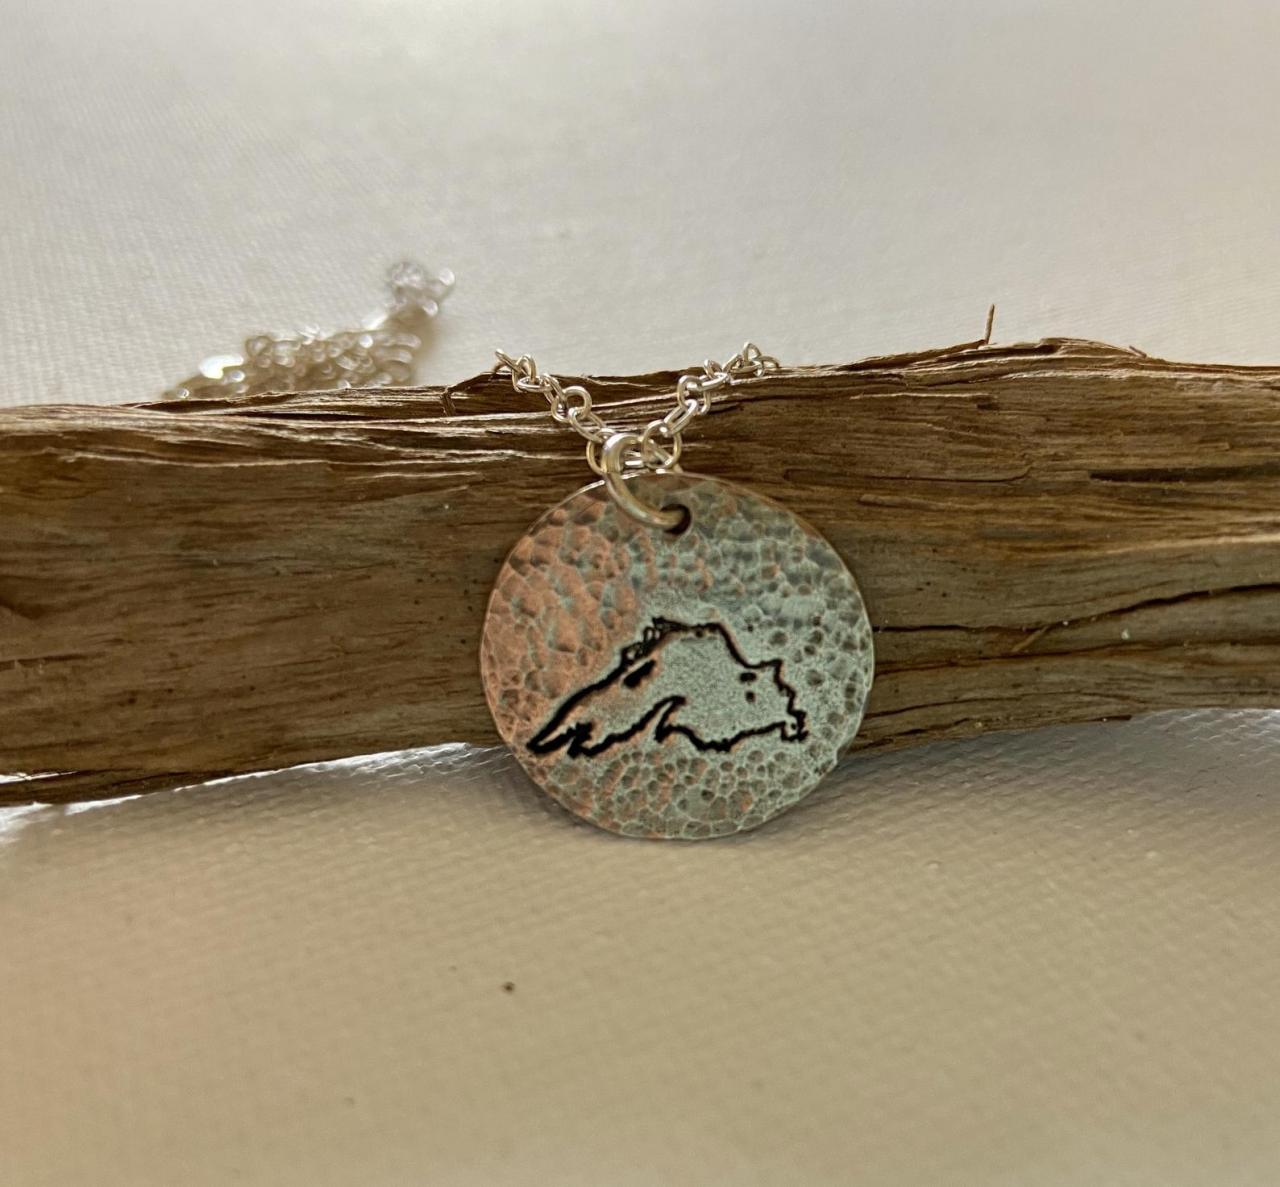 Lake Superior Gitche Gumee Big Lake Hammered Silver Pendant Chain Necklace Great Lakes